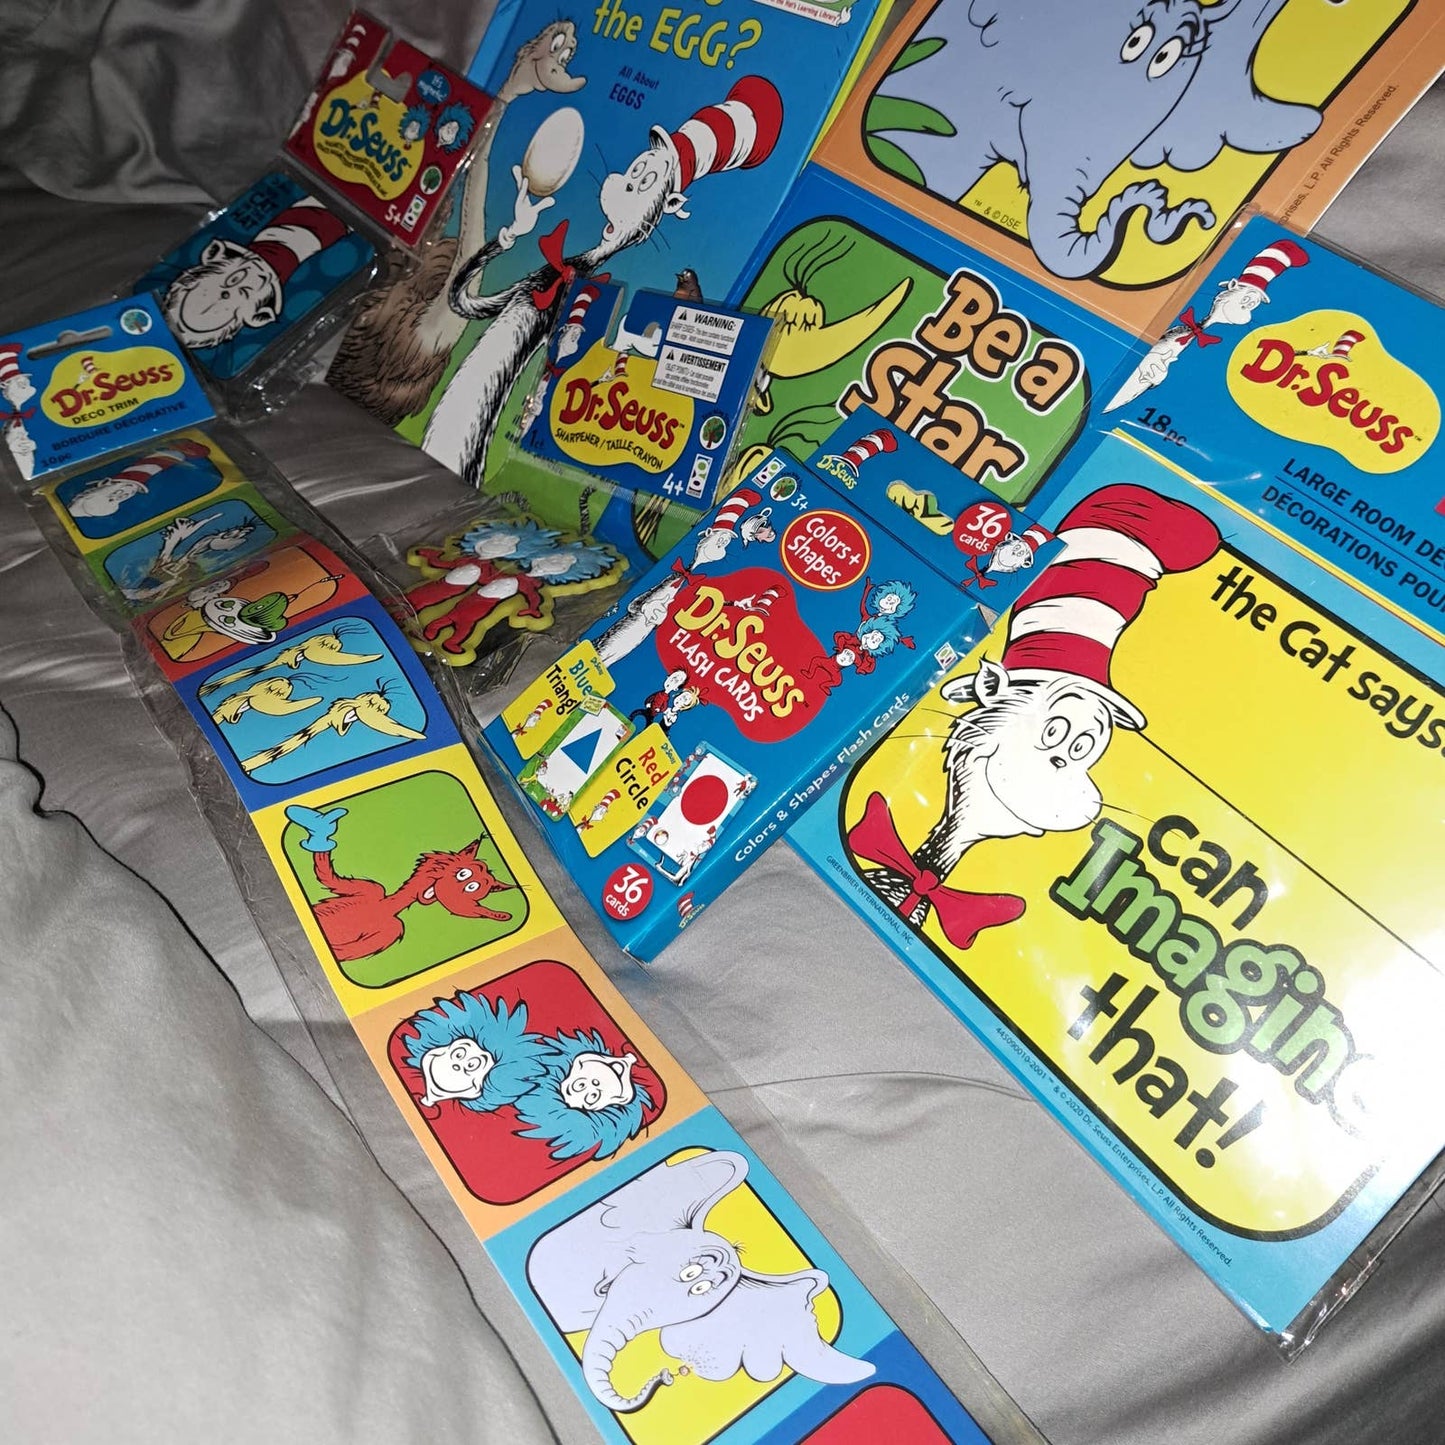 NWT- Dr. SEUSS FUN and Fantastic for Bedroom decor or Play